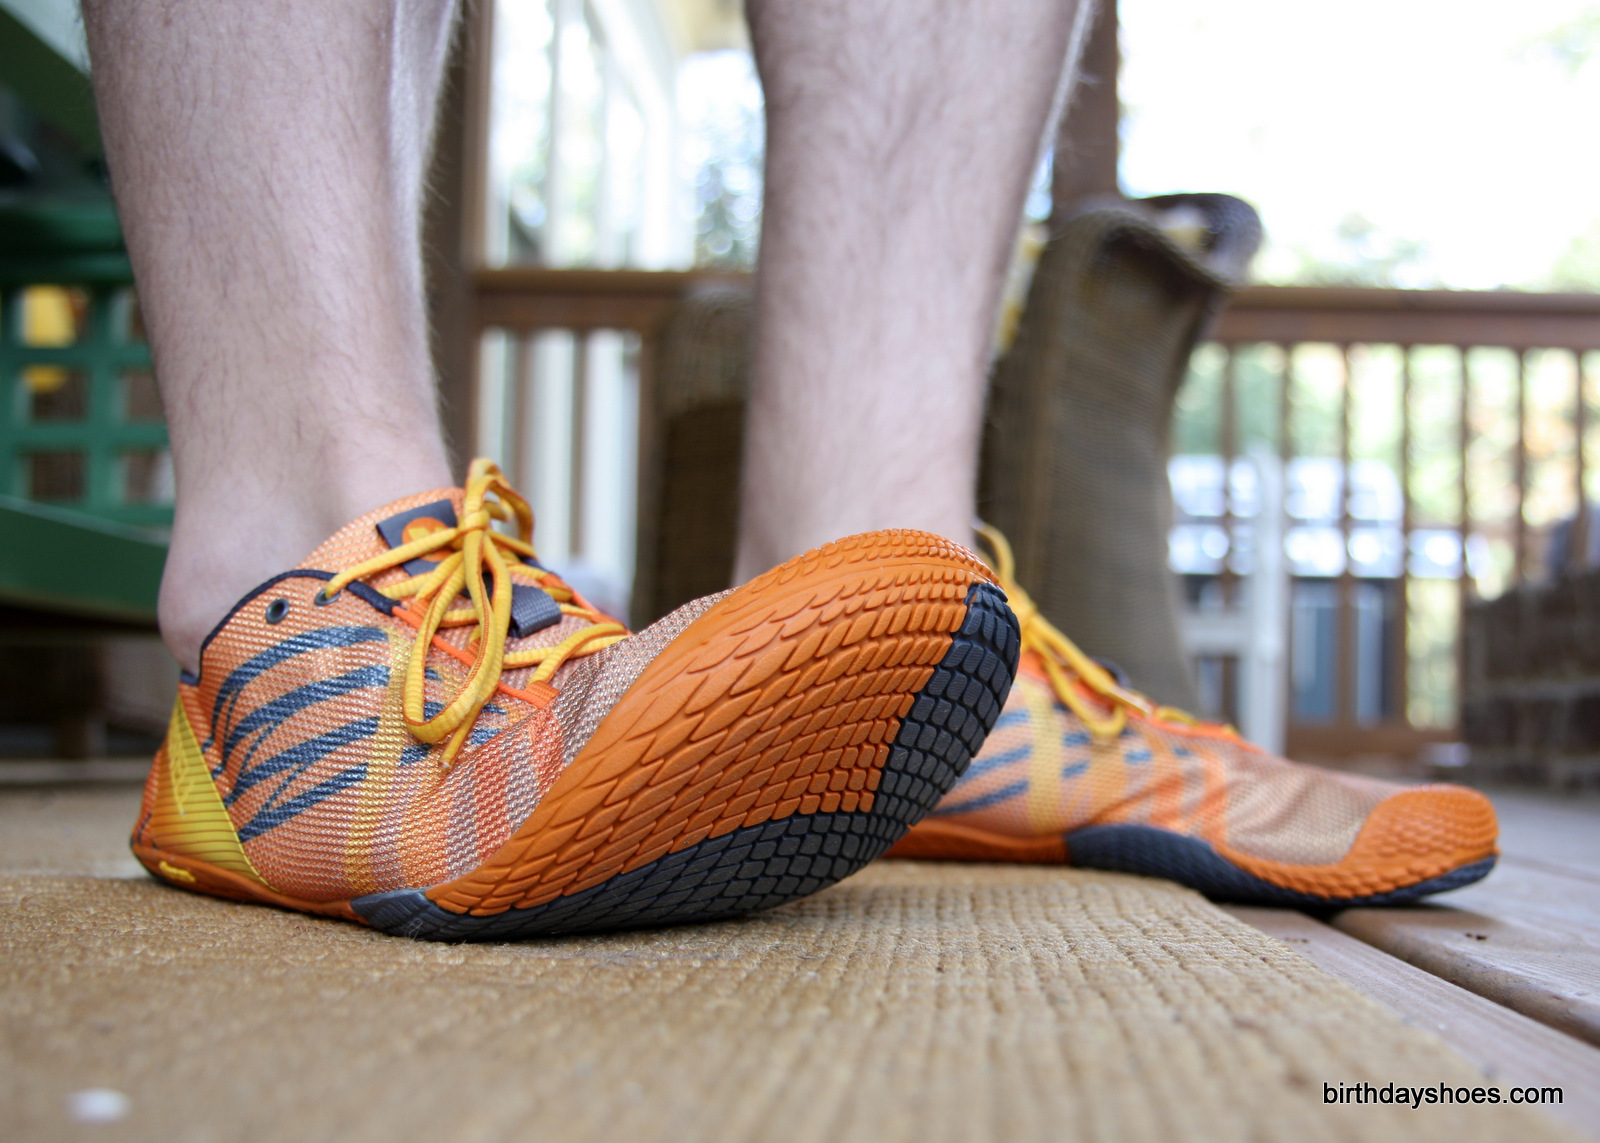 Dusør ego botanist Vapor Glove Merrell Barefoot Initial Review – Birthday Shoes – Toe Shoes,  Barefoot or Minimalist Shoes, and Vibram FiveFingers Reviews, News, Forums